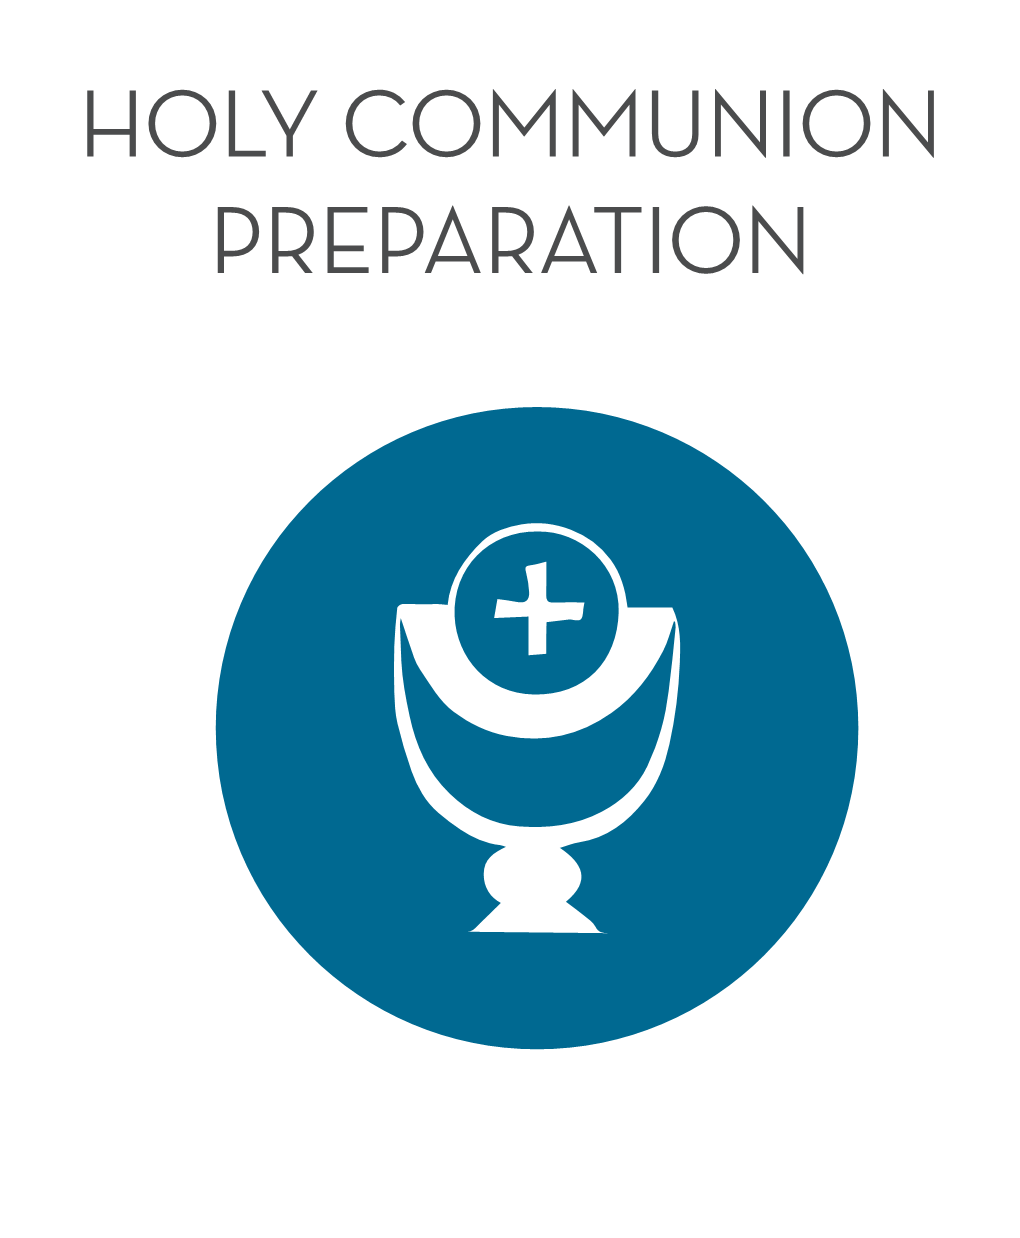 To Download the Holy Communion Preparation Booklet